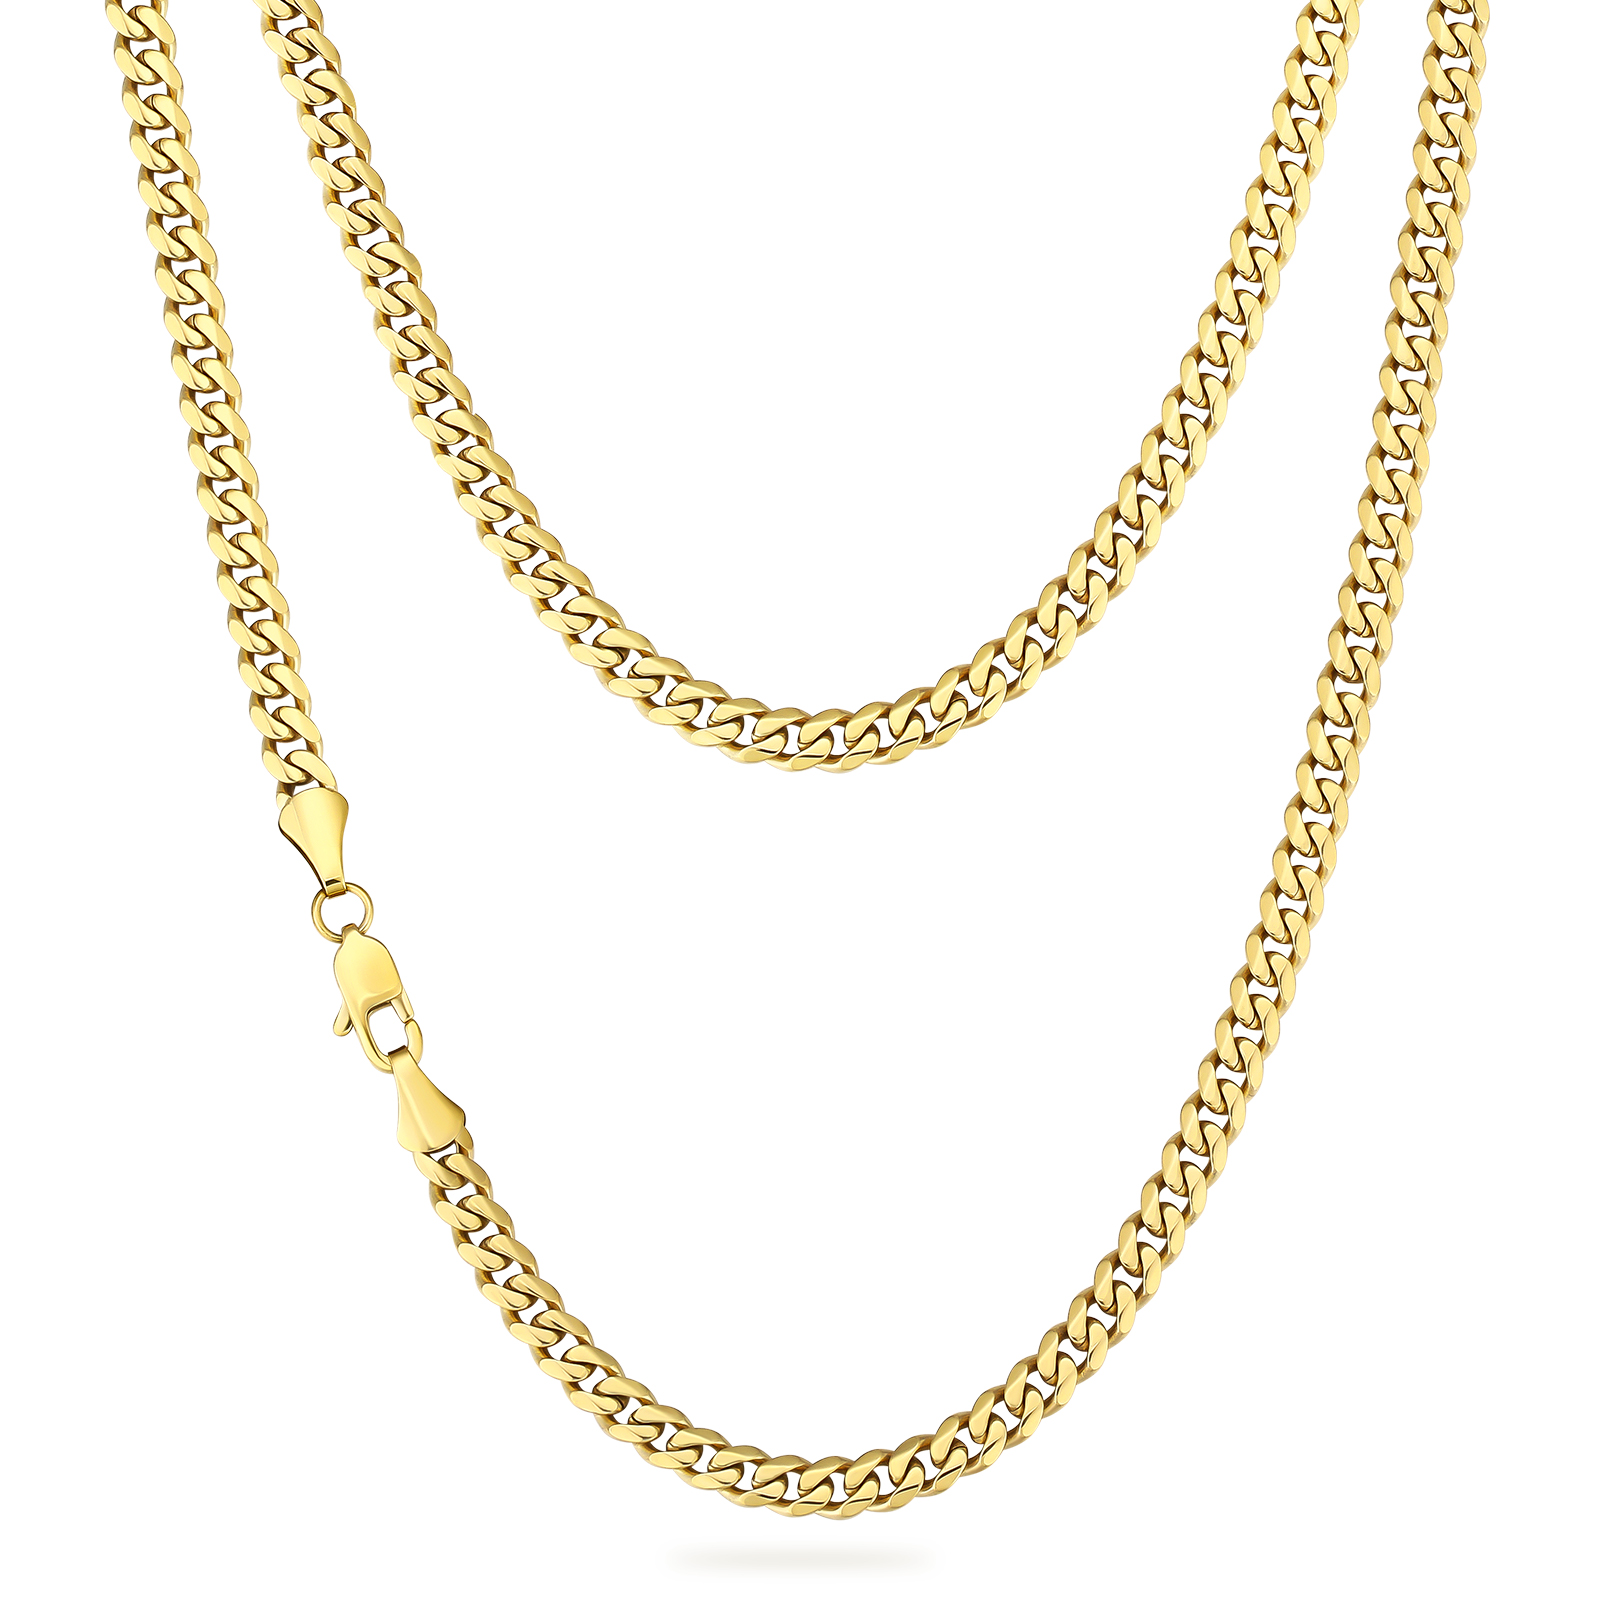 NEW】14k 6面 喜平 ネックレス メンズ 幅6mm chain hiphop jewelry KRKC